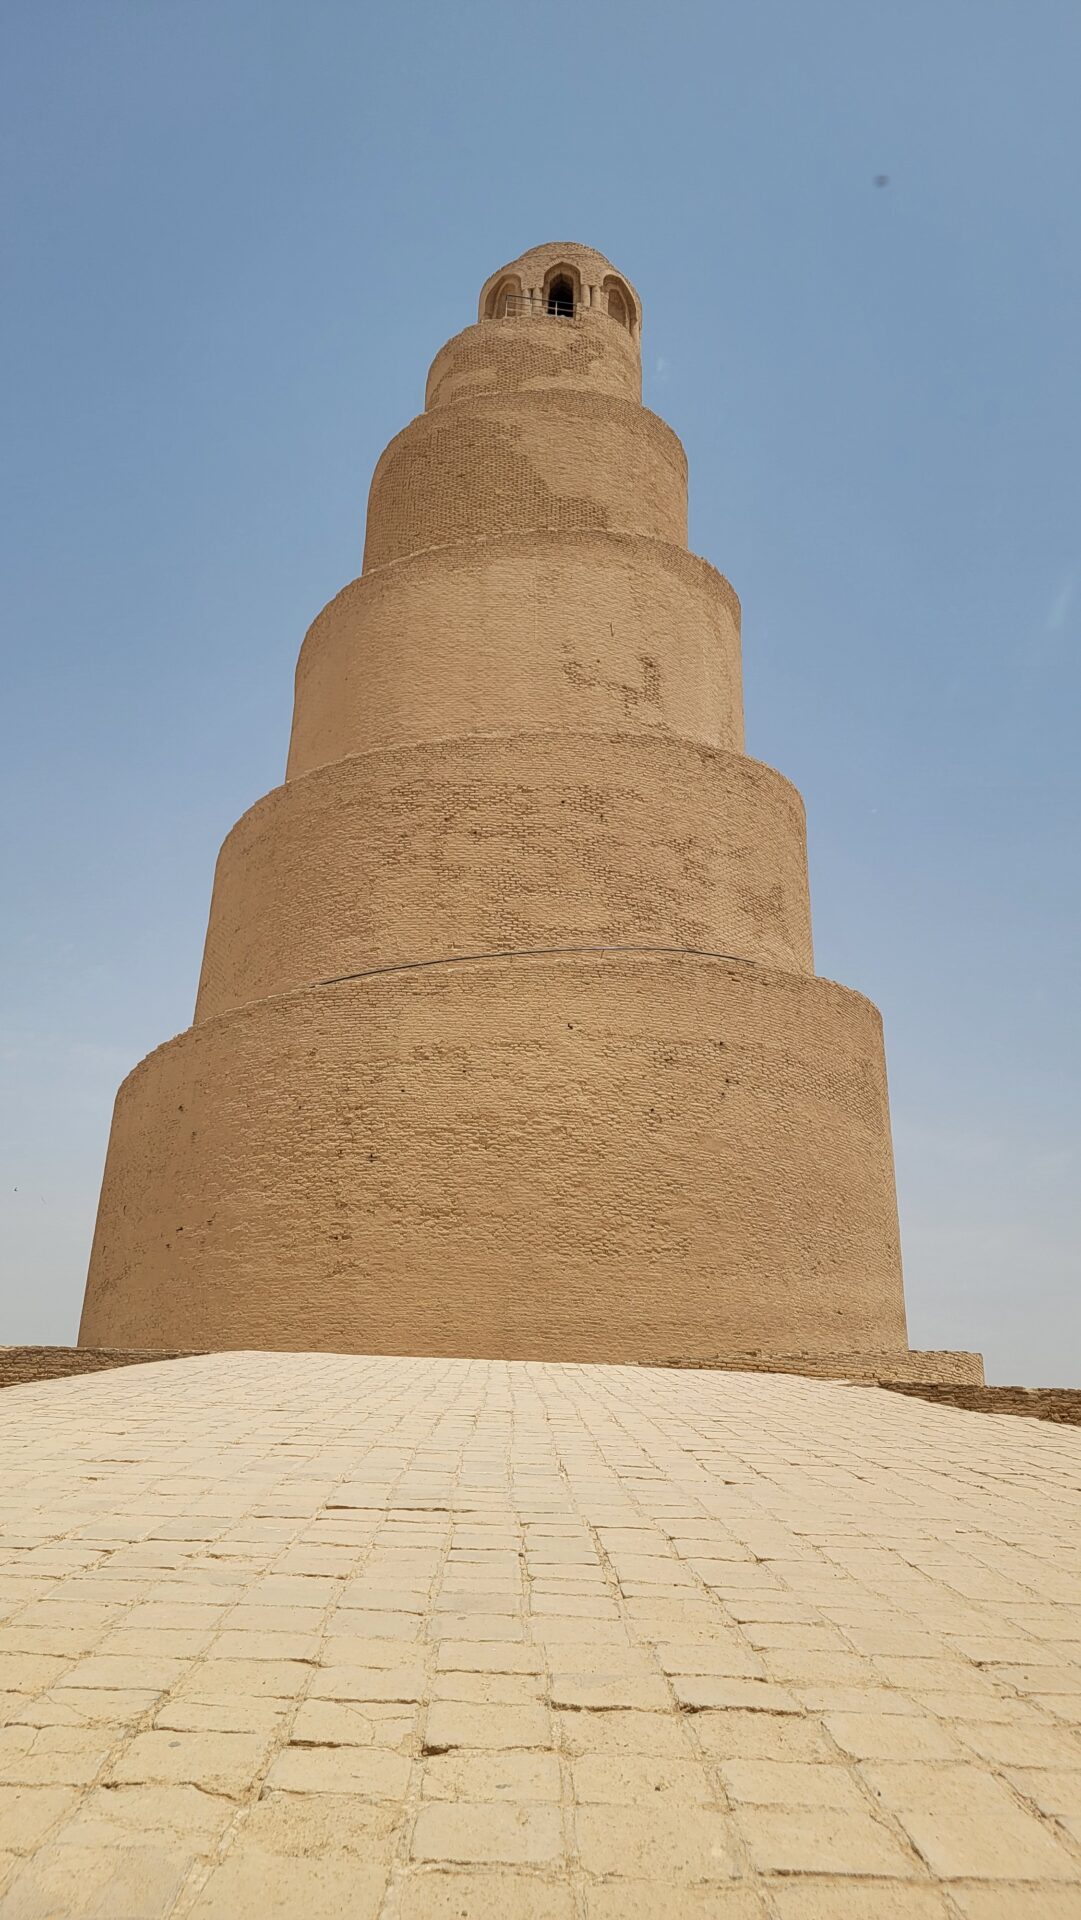 a large tower made of bricks